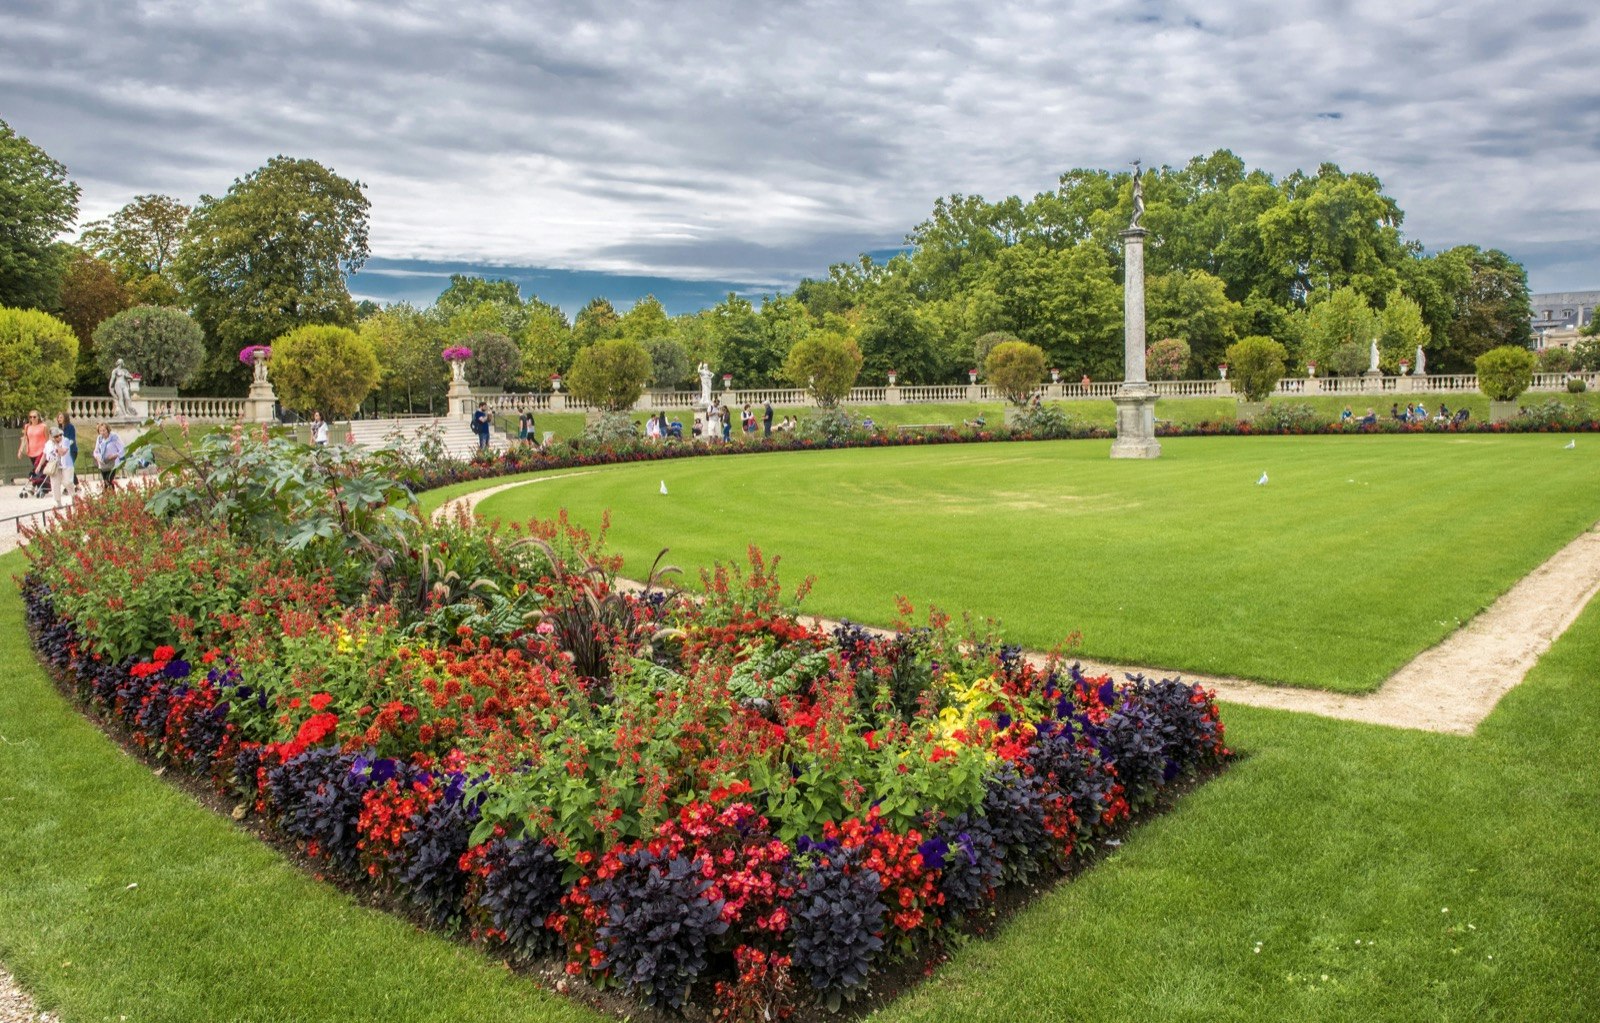 Flowers bloom around a green lawn at the Jardin du Luxembourg